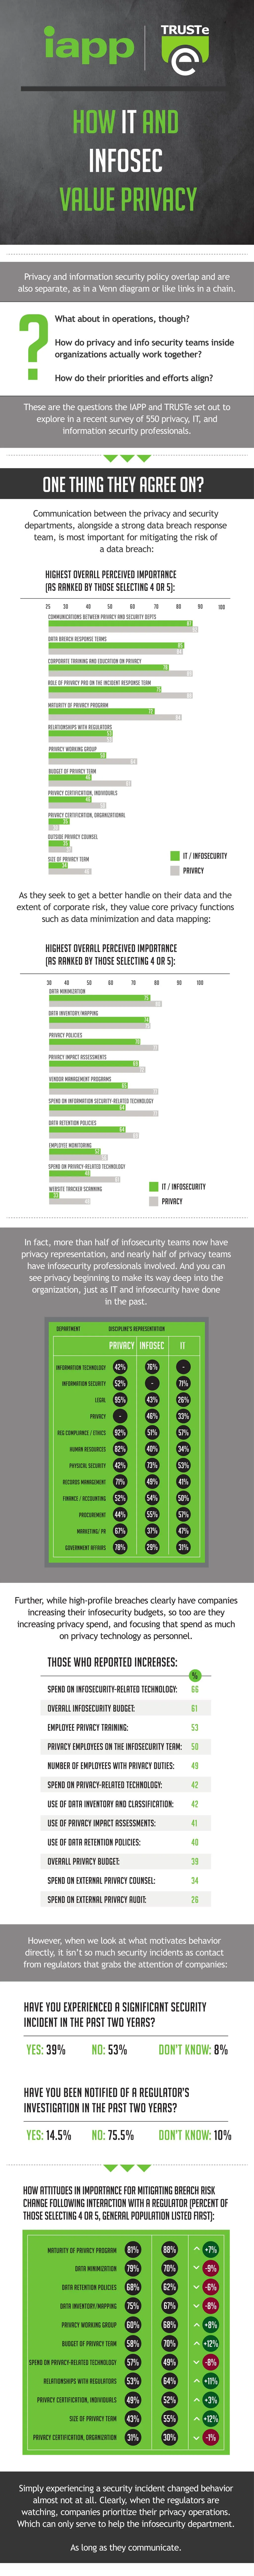 how it and infosec value privacy